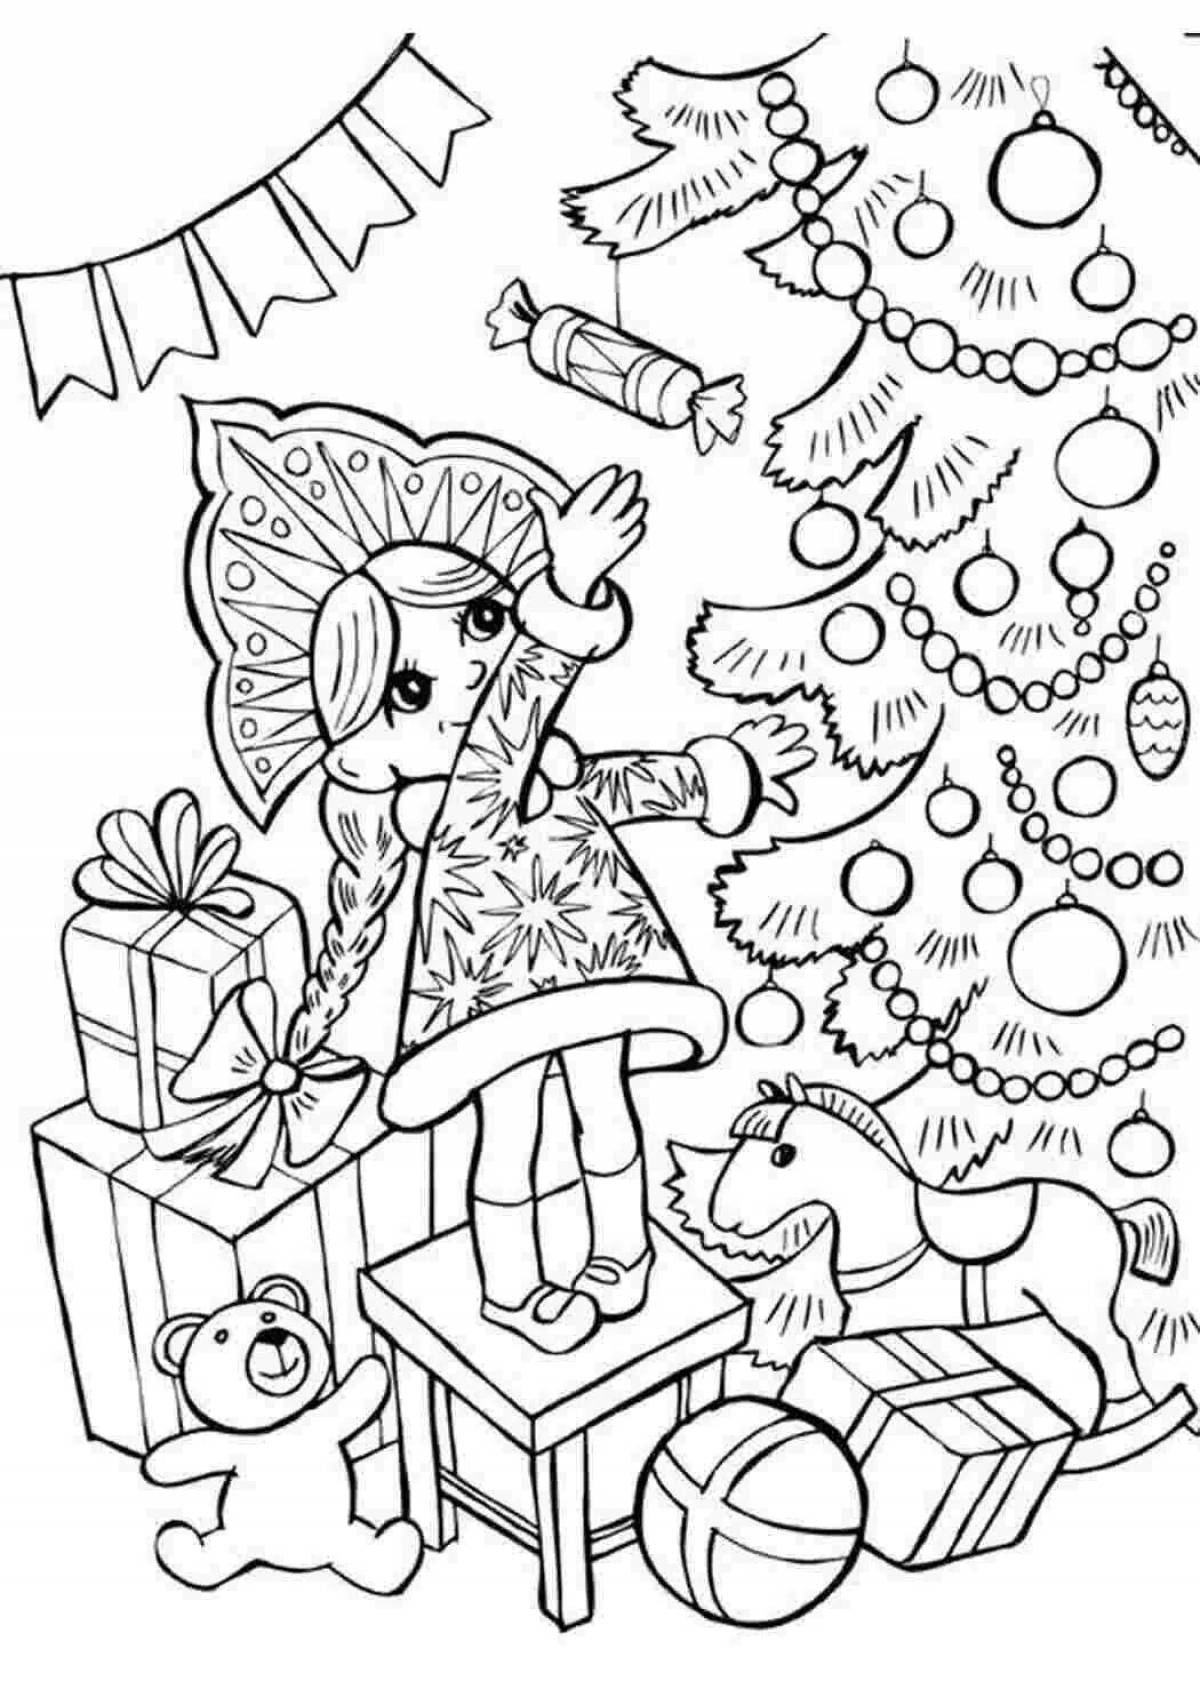 Incredible tree and snow maiden coloring book